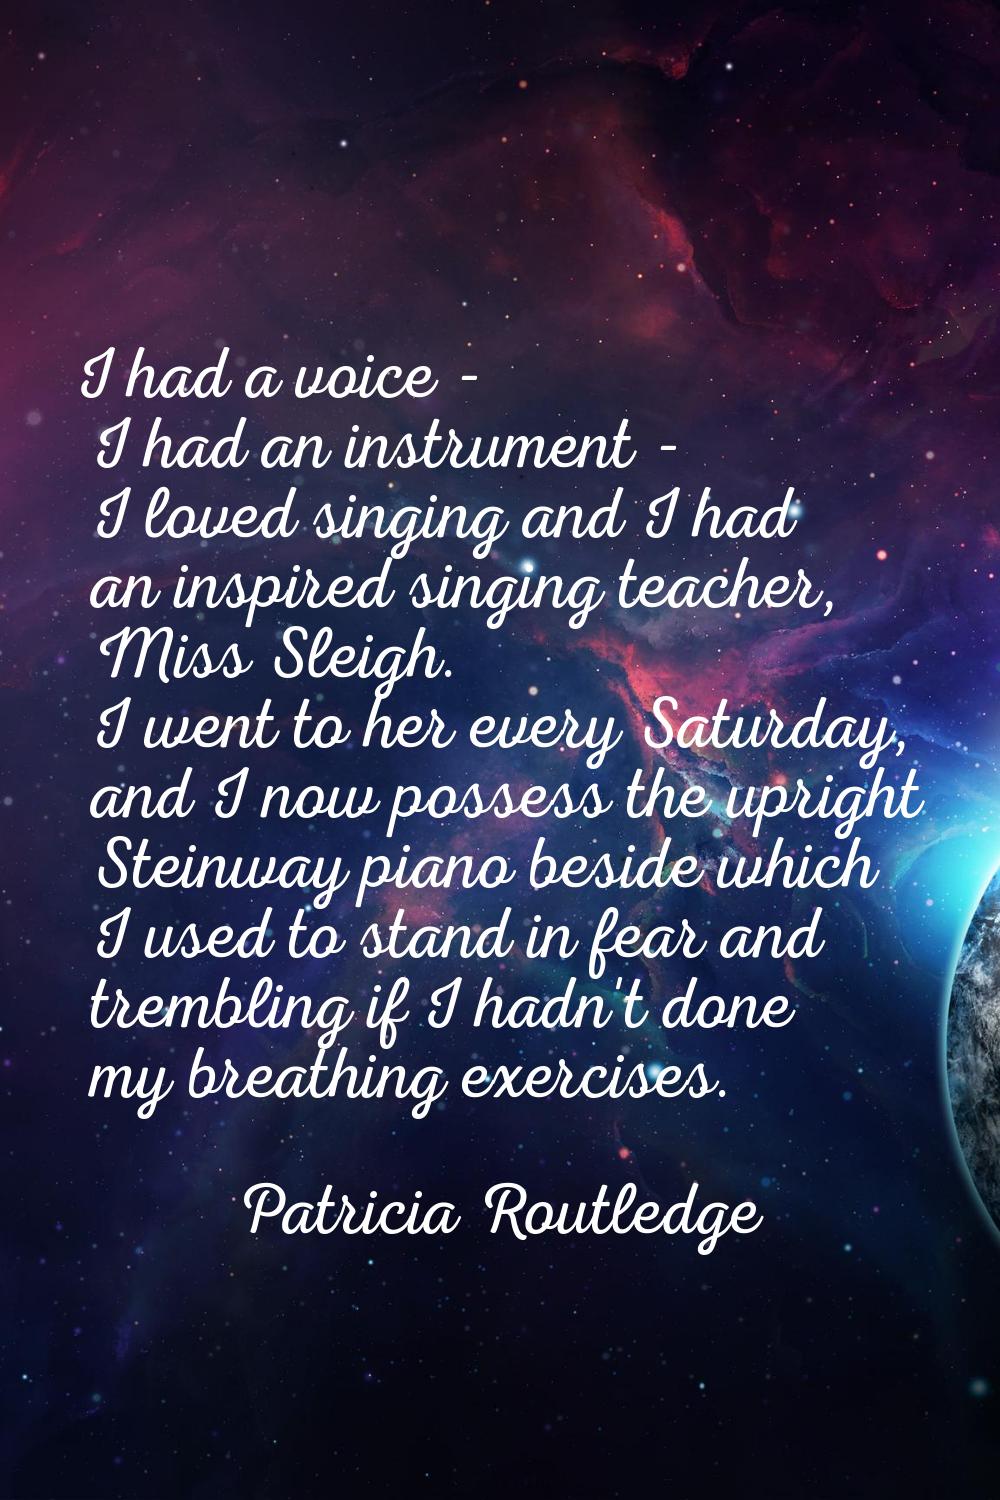 I had a voice - I had an instrument - I loved singing and I had an inspired singing teacher, Miss S